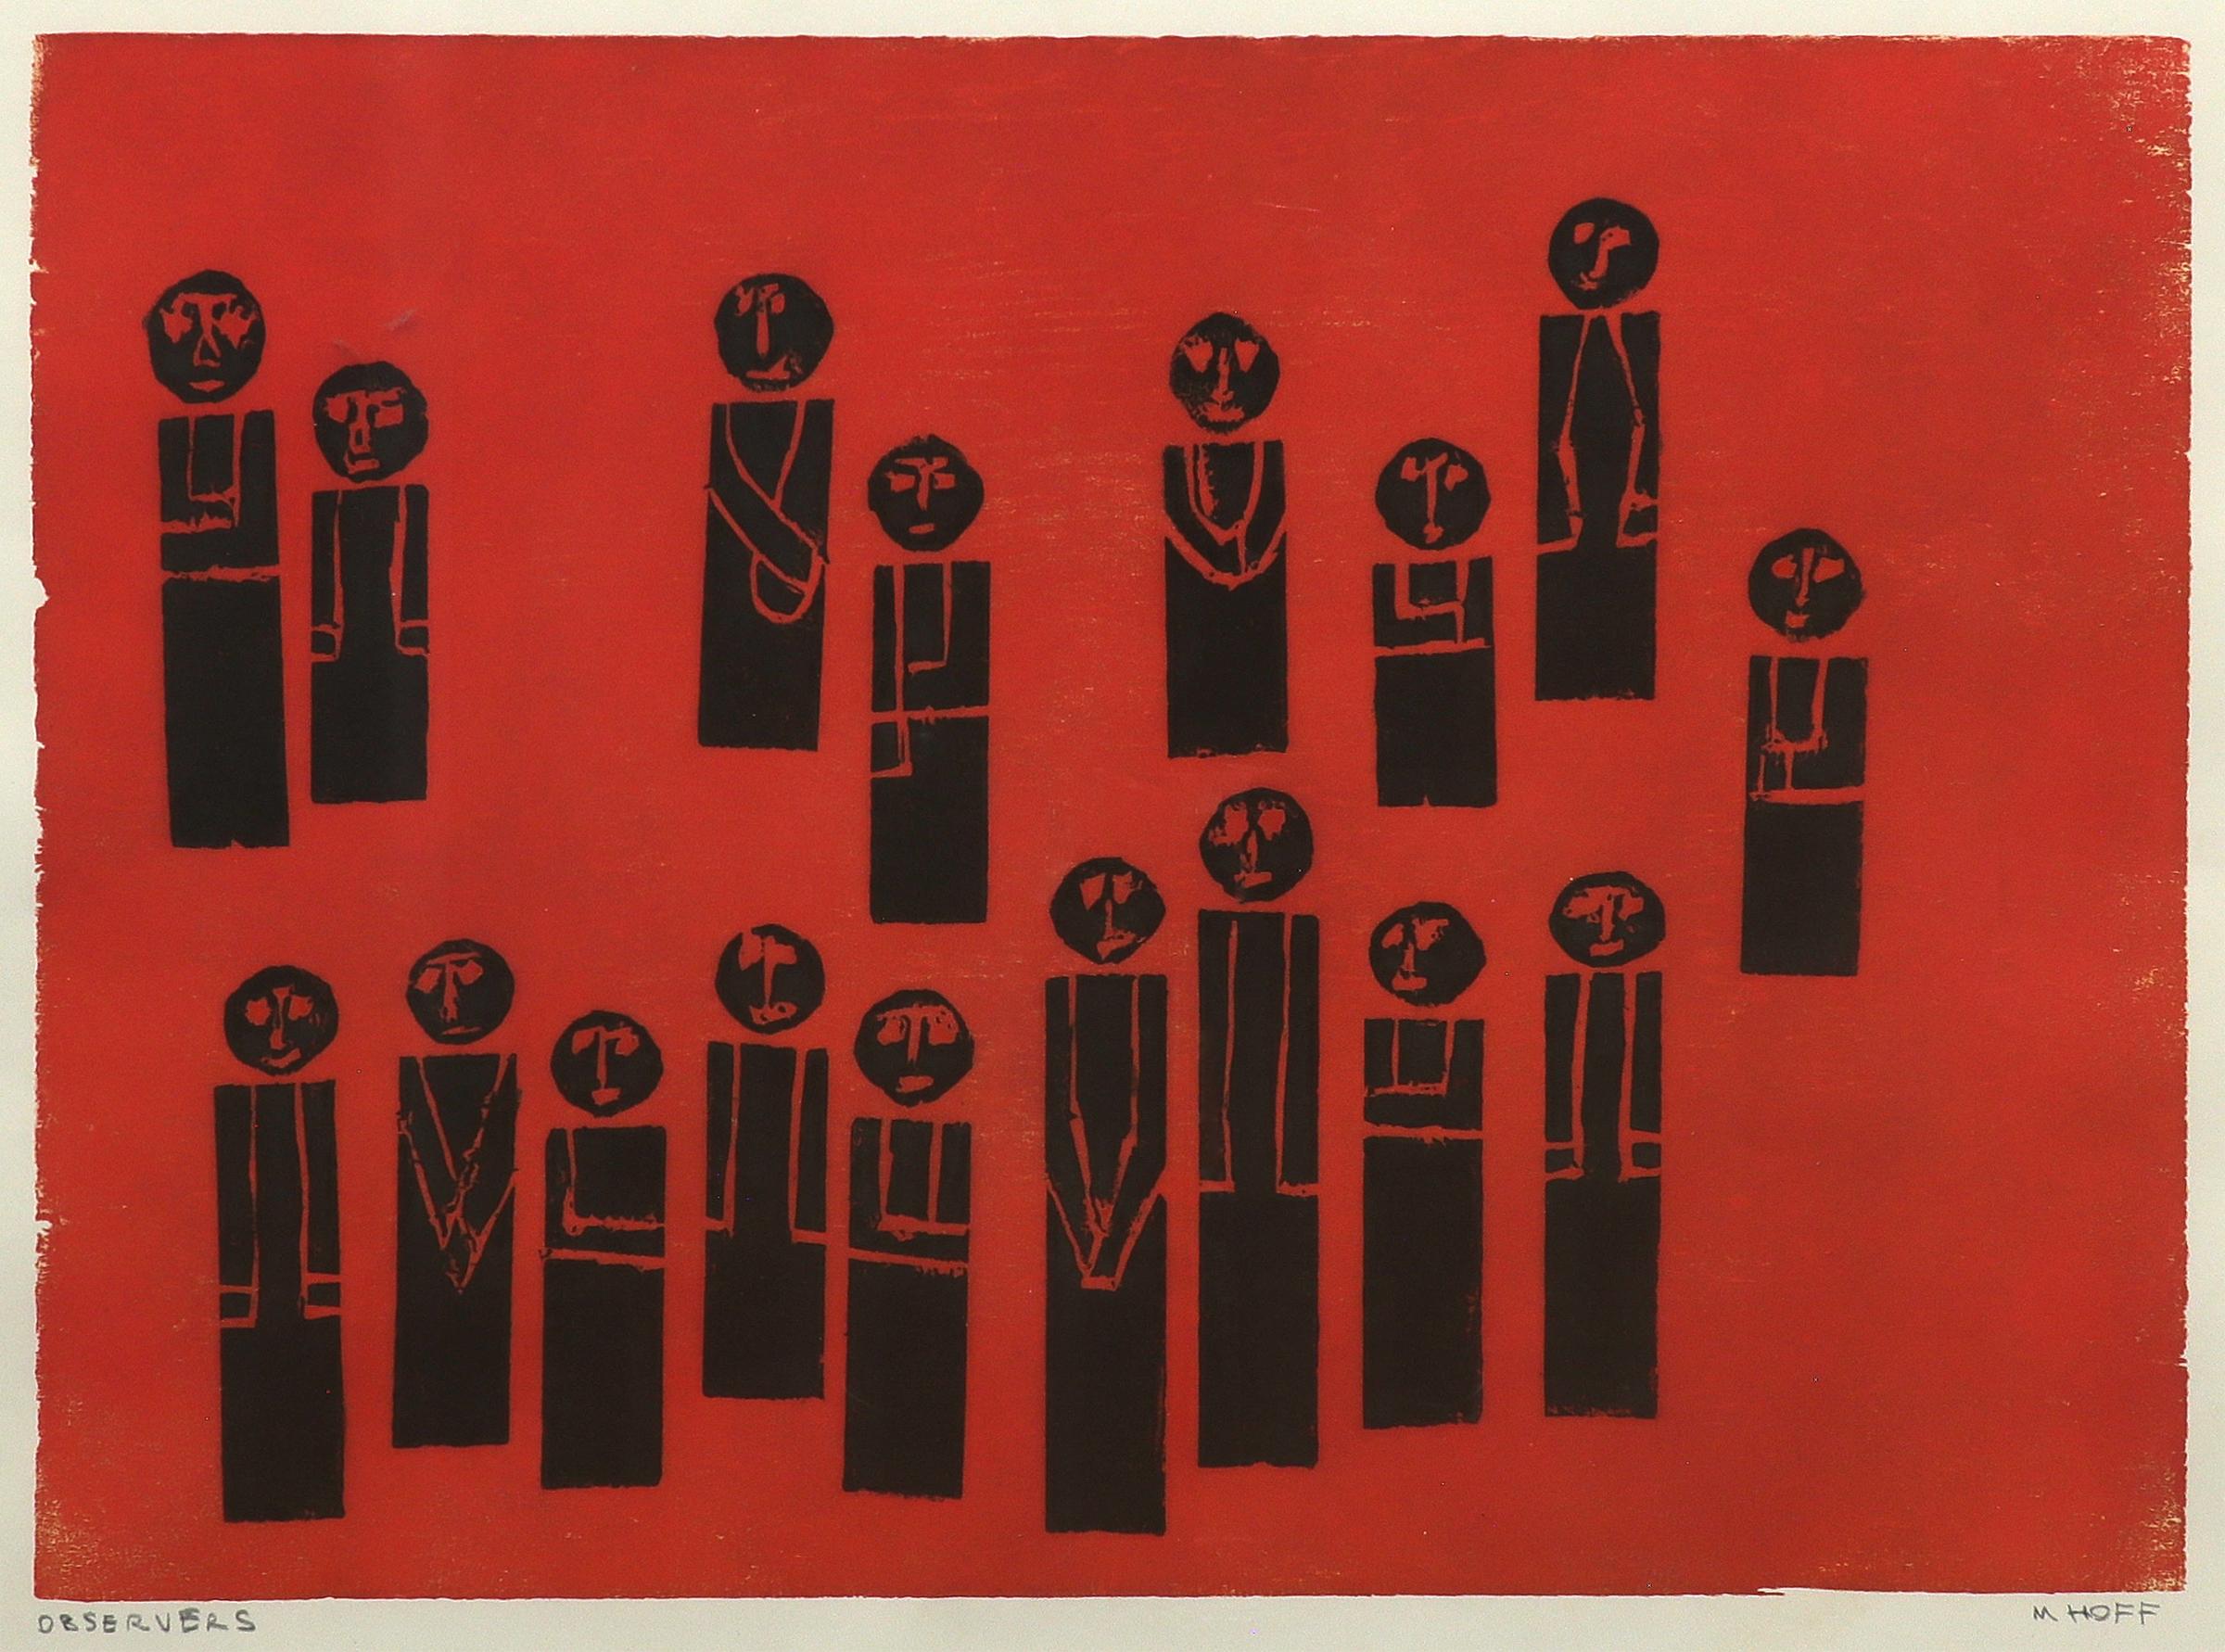 Woodblock on colored paper by Margo Hoff (1910-2008) titled 'Observers' of a black and red abstract scene with seventeen figures whose arms are in various positions, looking out at the viewer. Presented in a frame measuring 20 ½ x 24 ½ inches. Image